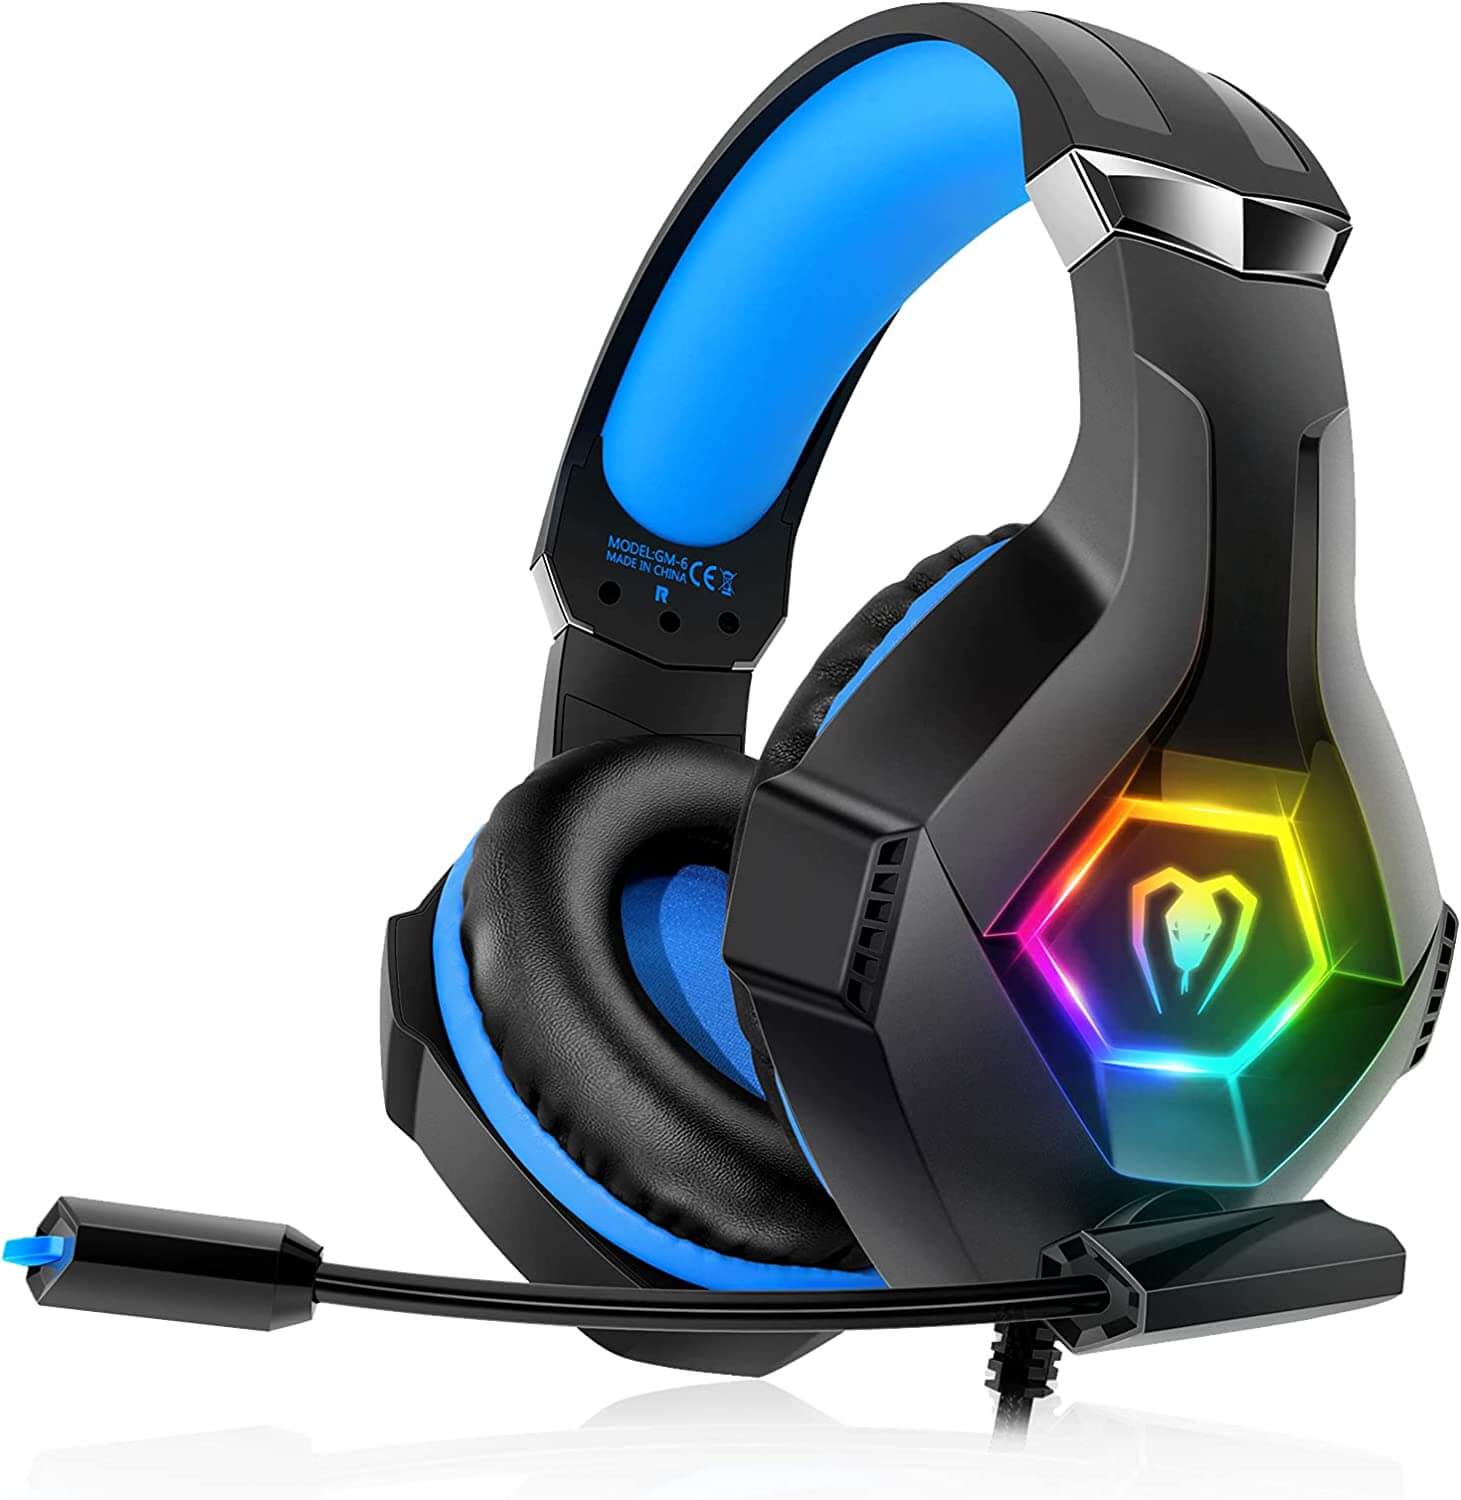 Gaming Headset for PS4 Xbox One PC, Over Ear Gaming Headphones with Noise Cancelling Microphone Volume Control RGB LED Light, for PC Laptop Mac Tablet Smart Phone